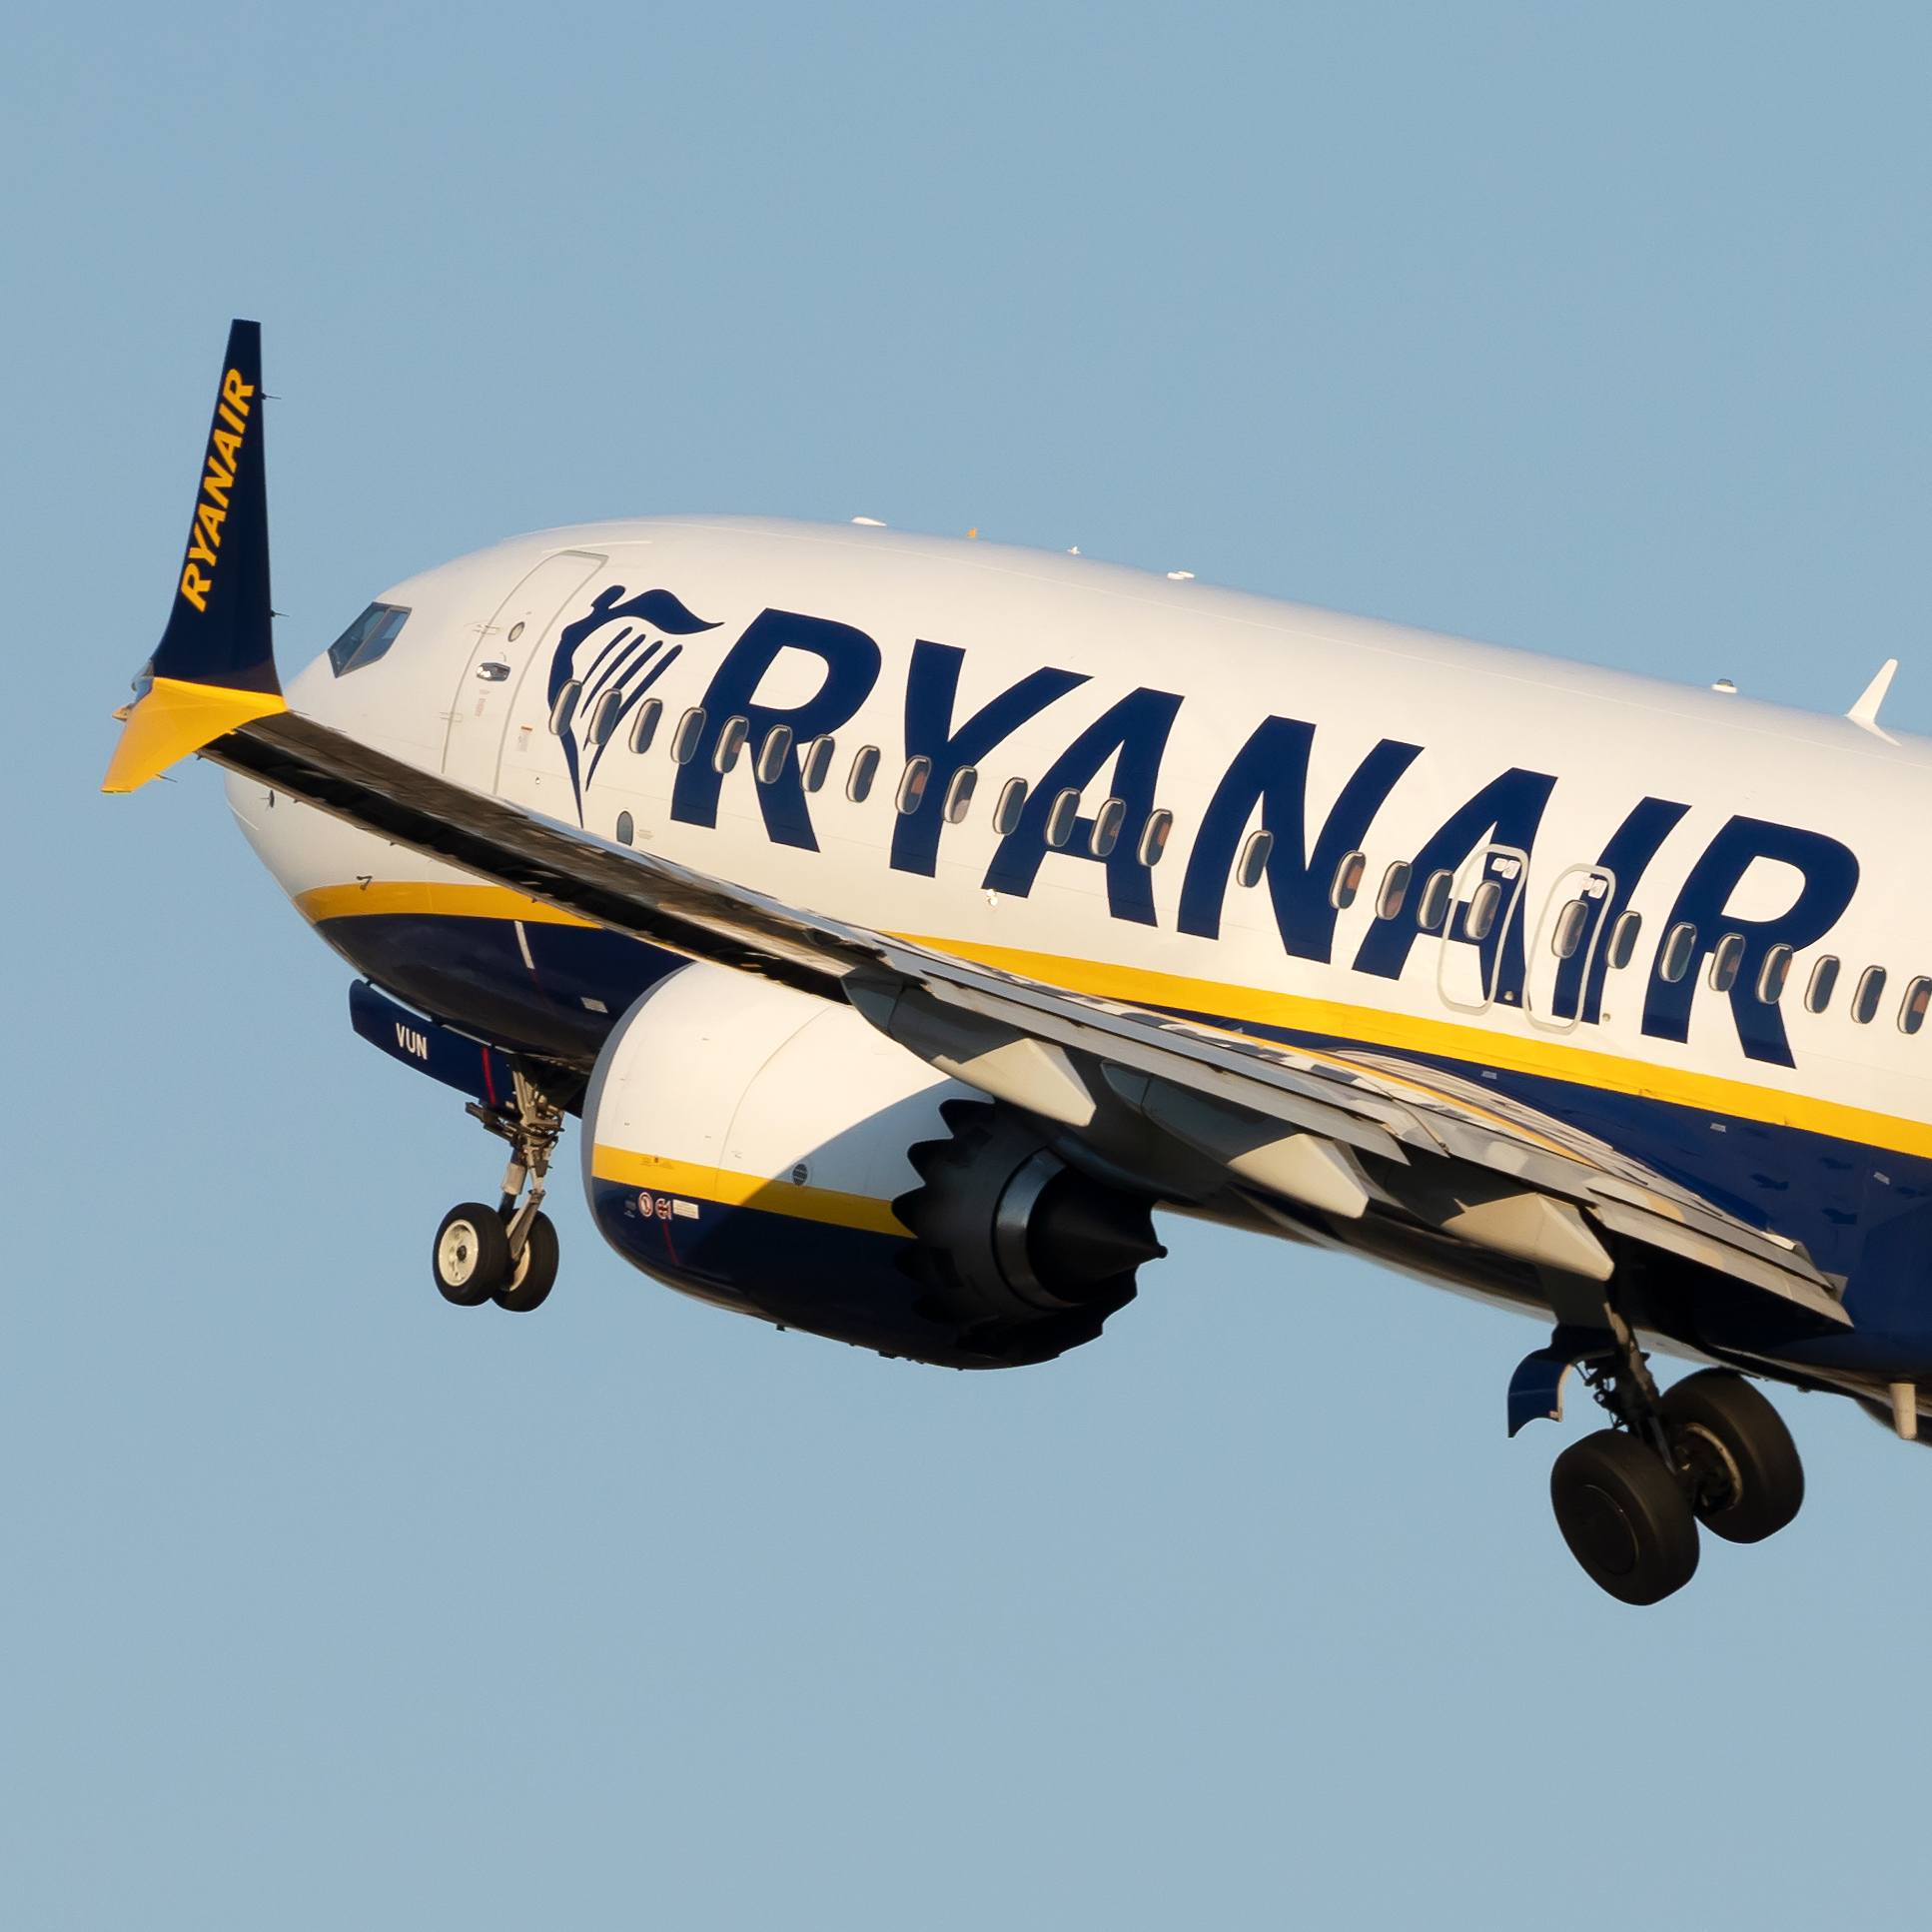 Ryanair recorded its busiest month ever in June.